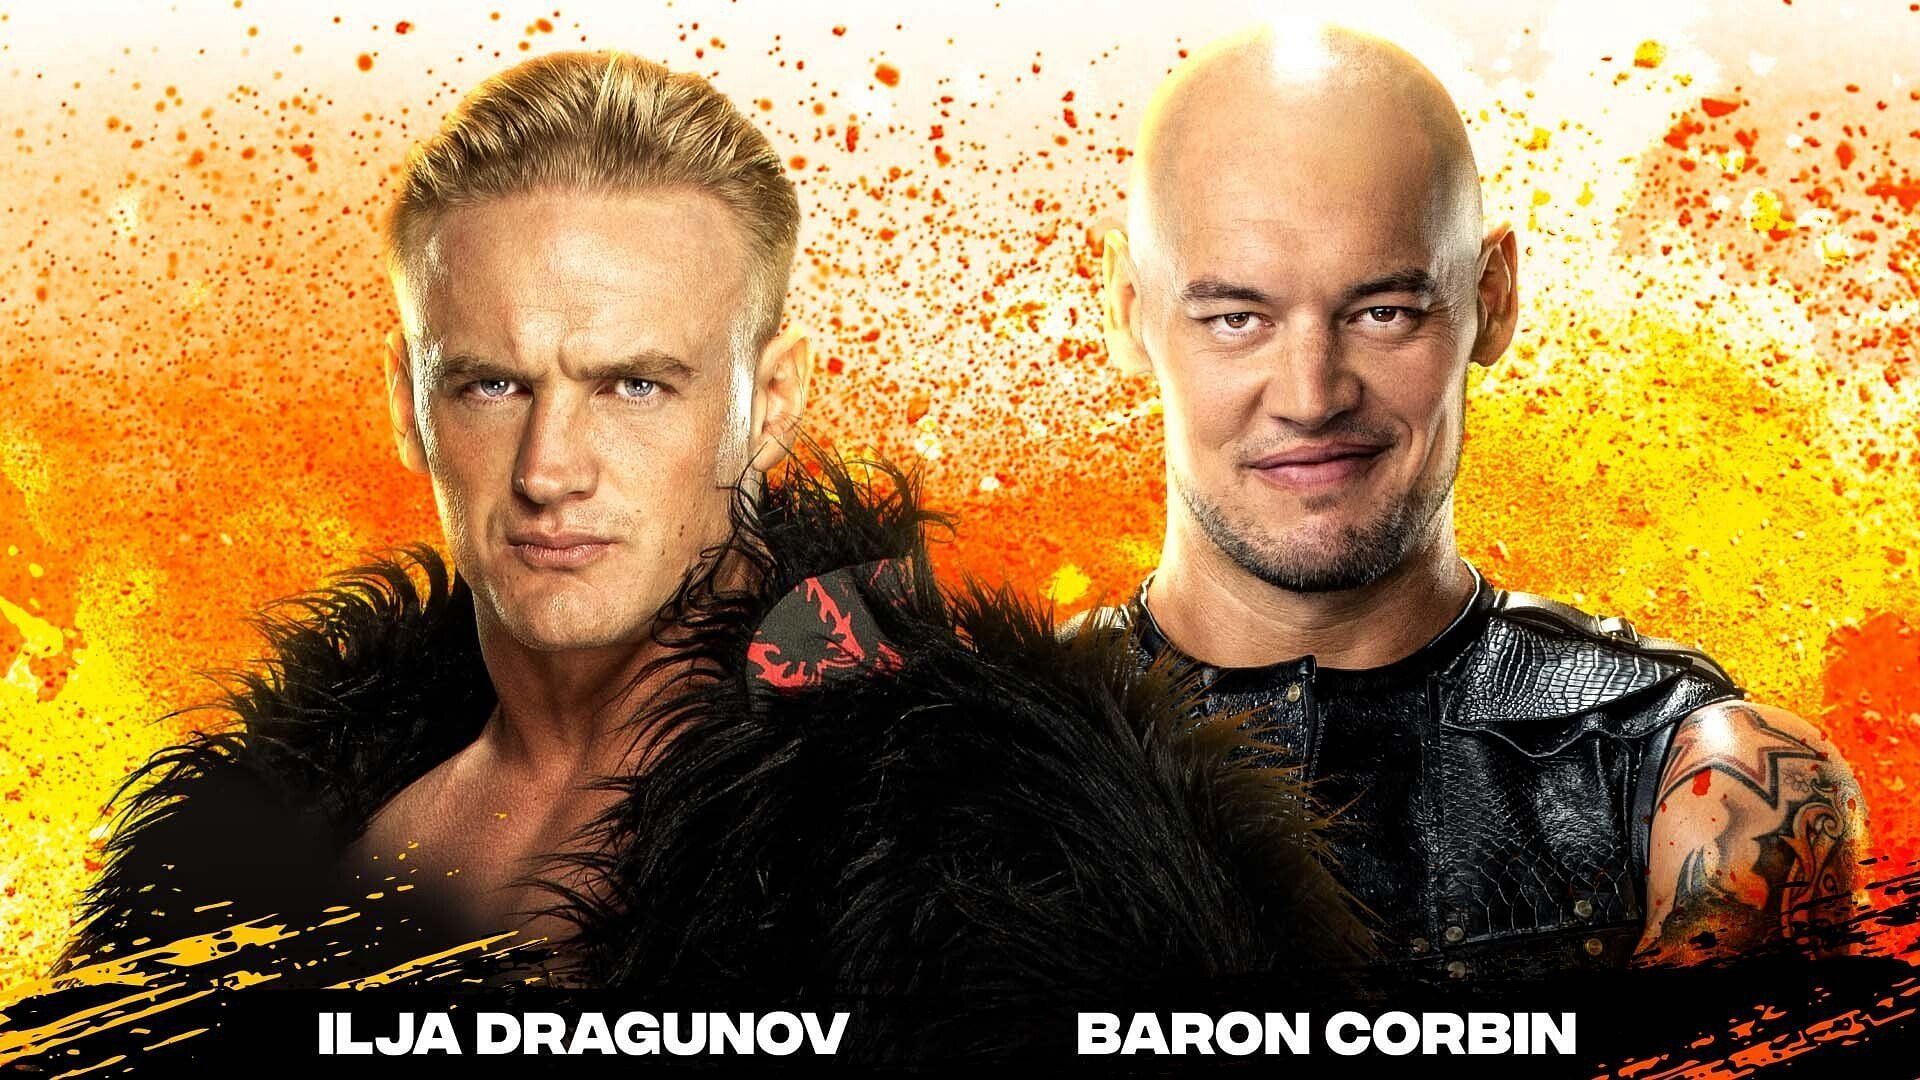 Things have become very personal between Ilja Dragunov and Baron Corbin.